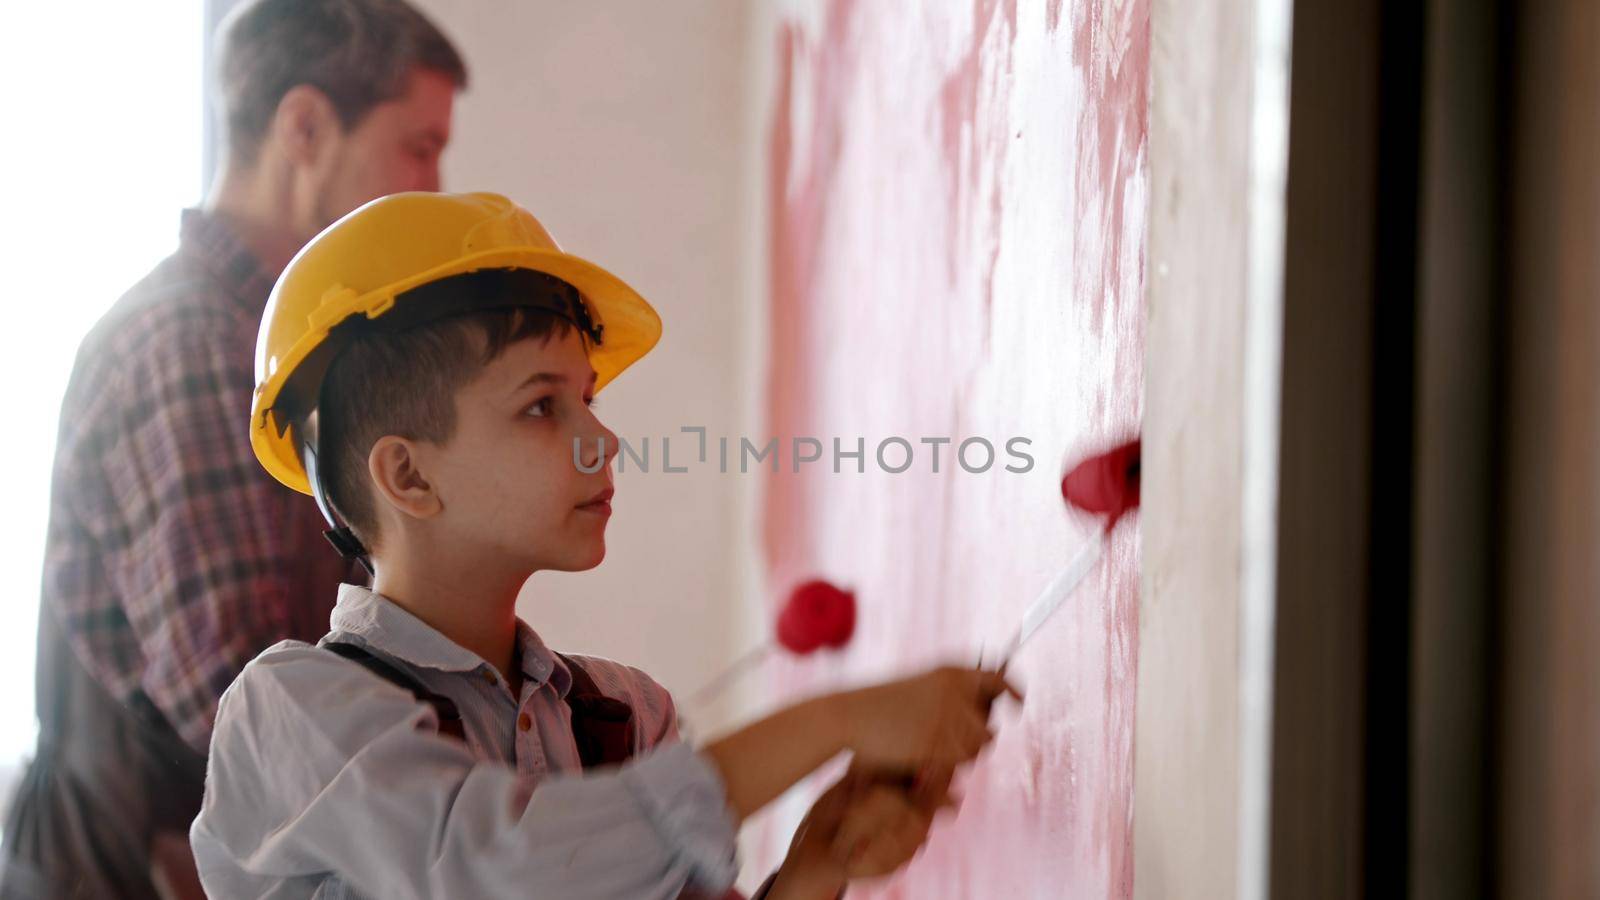 A little boy and his smiling father painting walls in red color. Mid shot